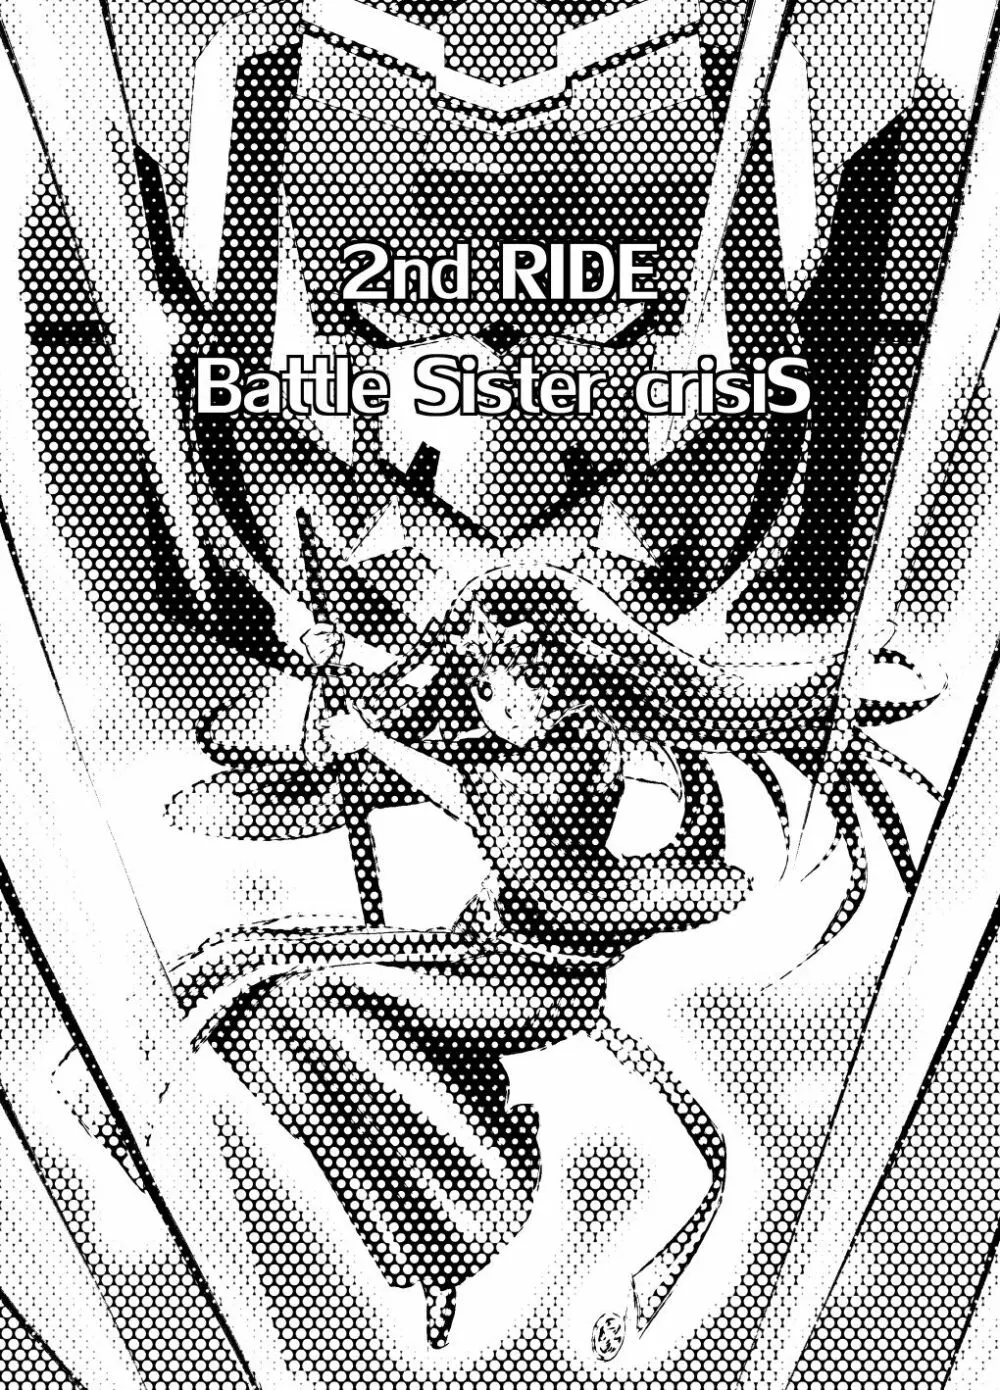 2nd RIDE -Battle Sister crisiS- Page.2